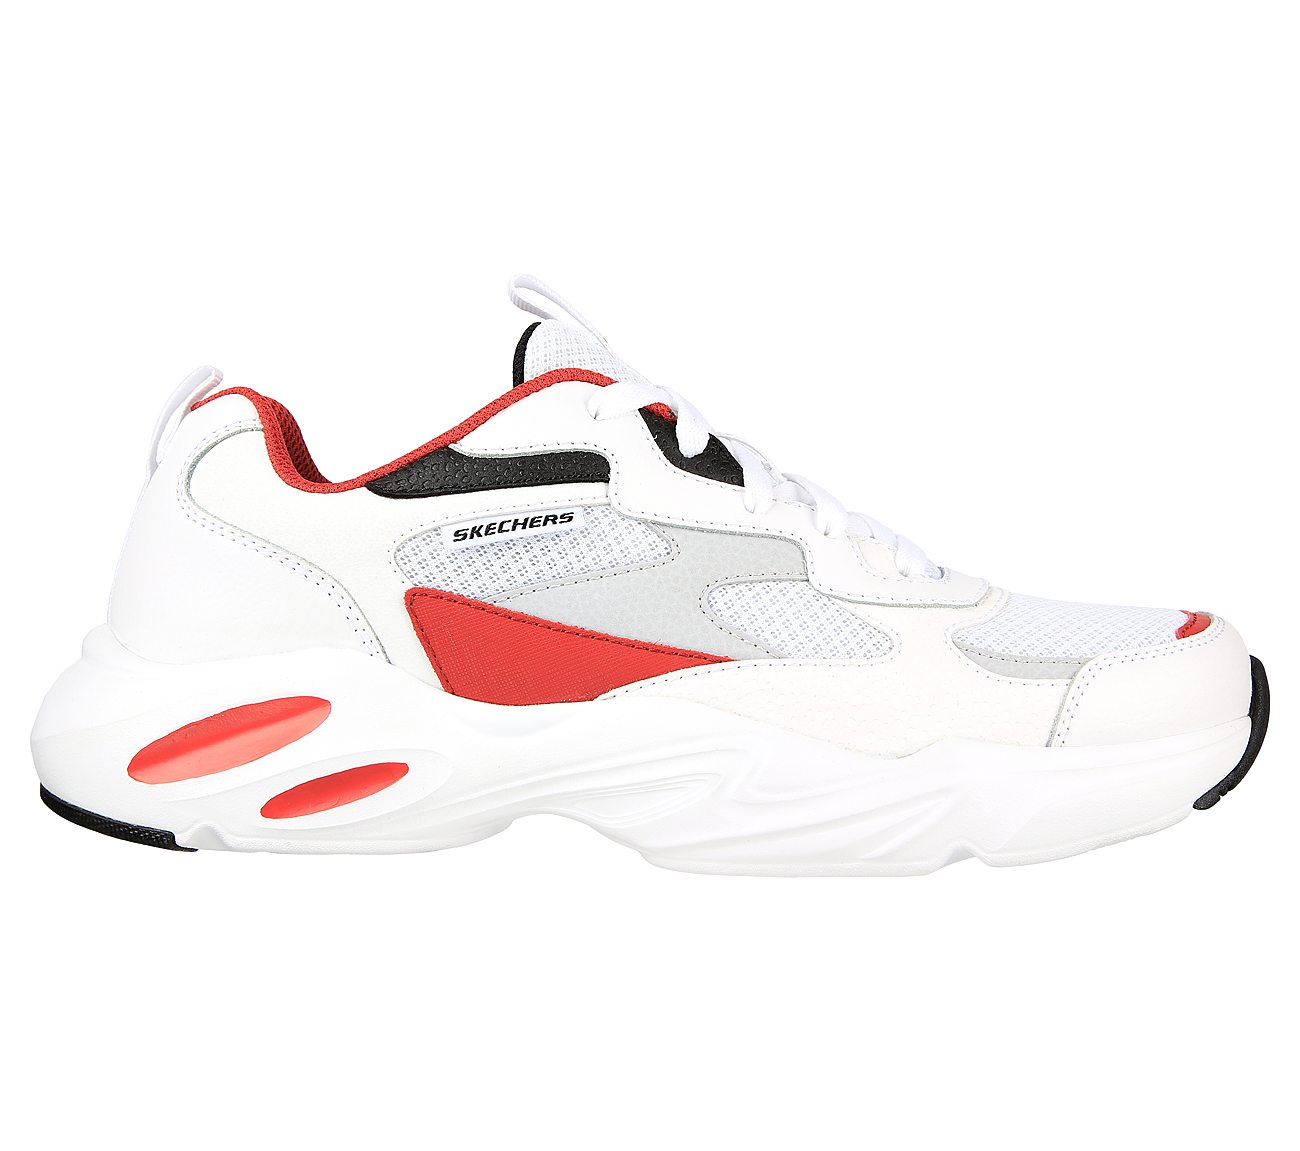 STAMINA AIRY - MOREMI, WHITE/RED Footwear Right View